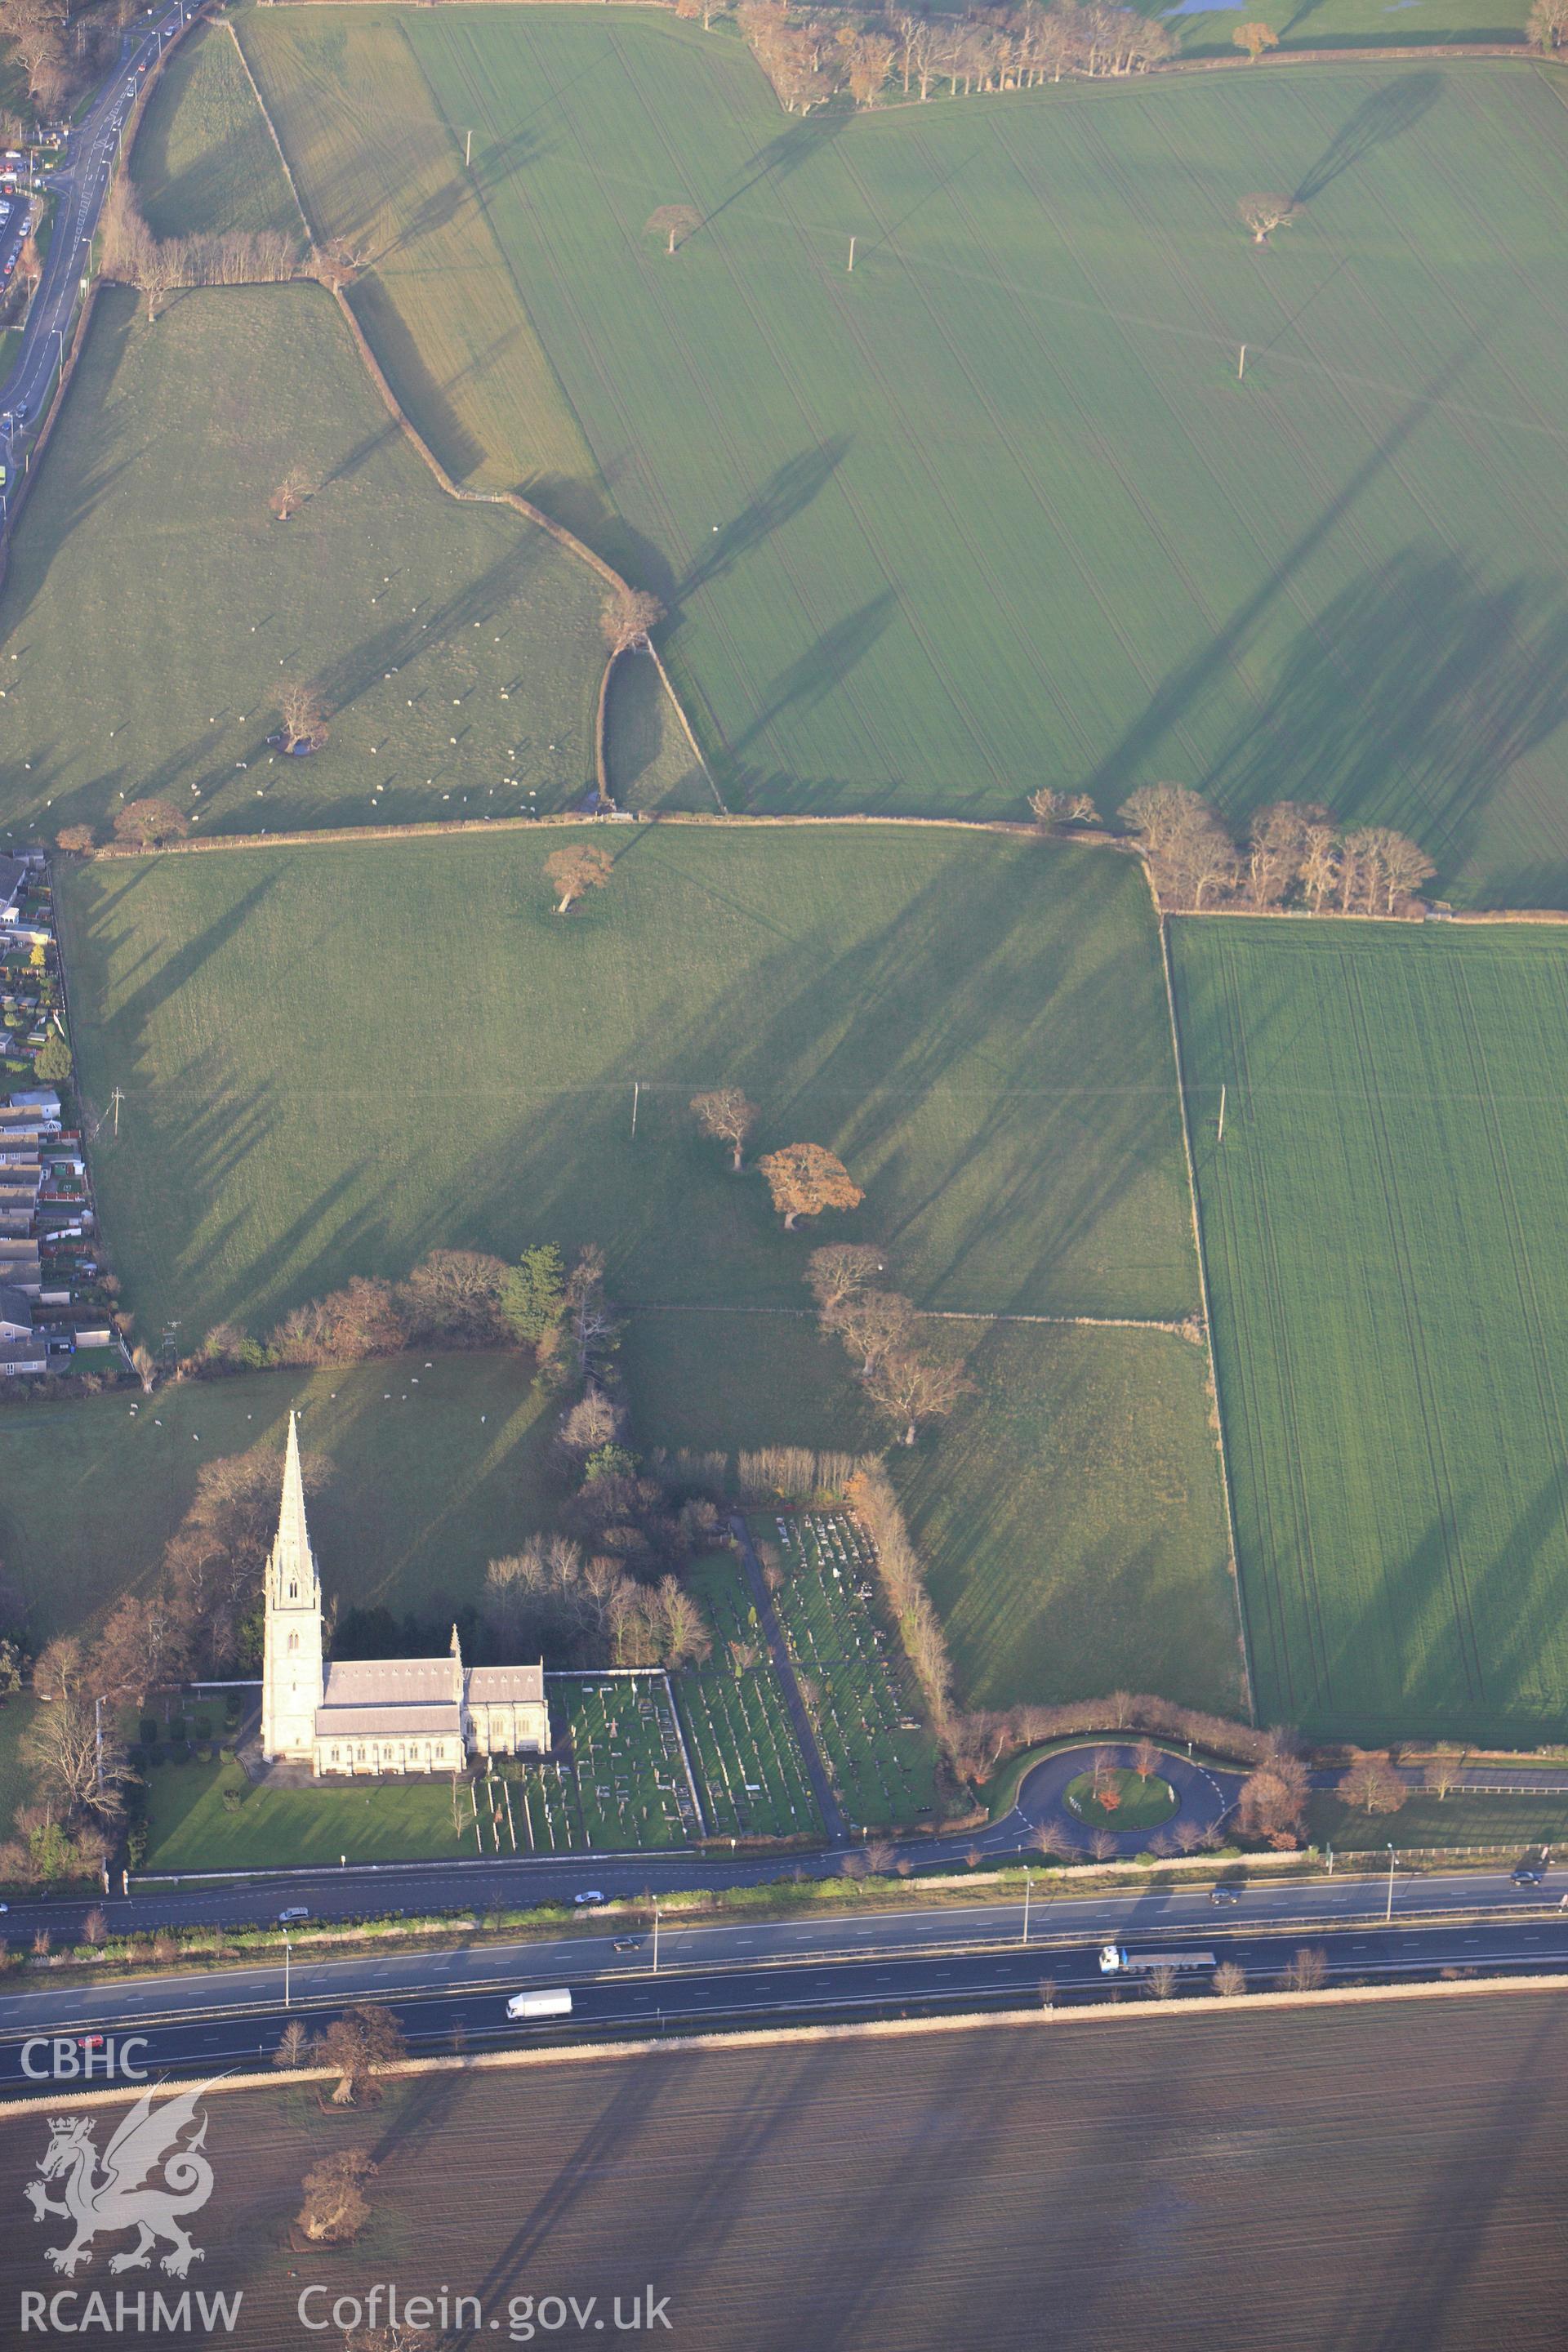 RCAHMW colour oblique aerial photograph of St Margaret's Church (The Marble Church), Bodelwyddan. Taken on 10 December 2009 by Toby Driver